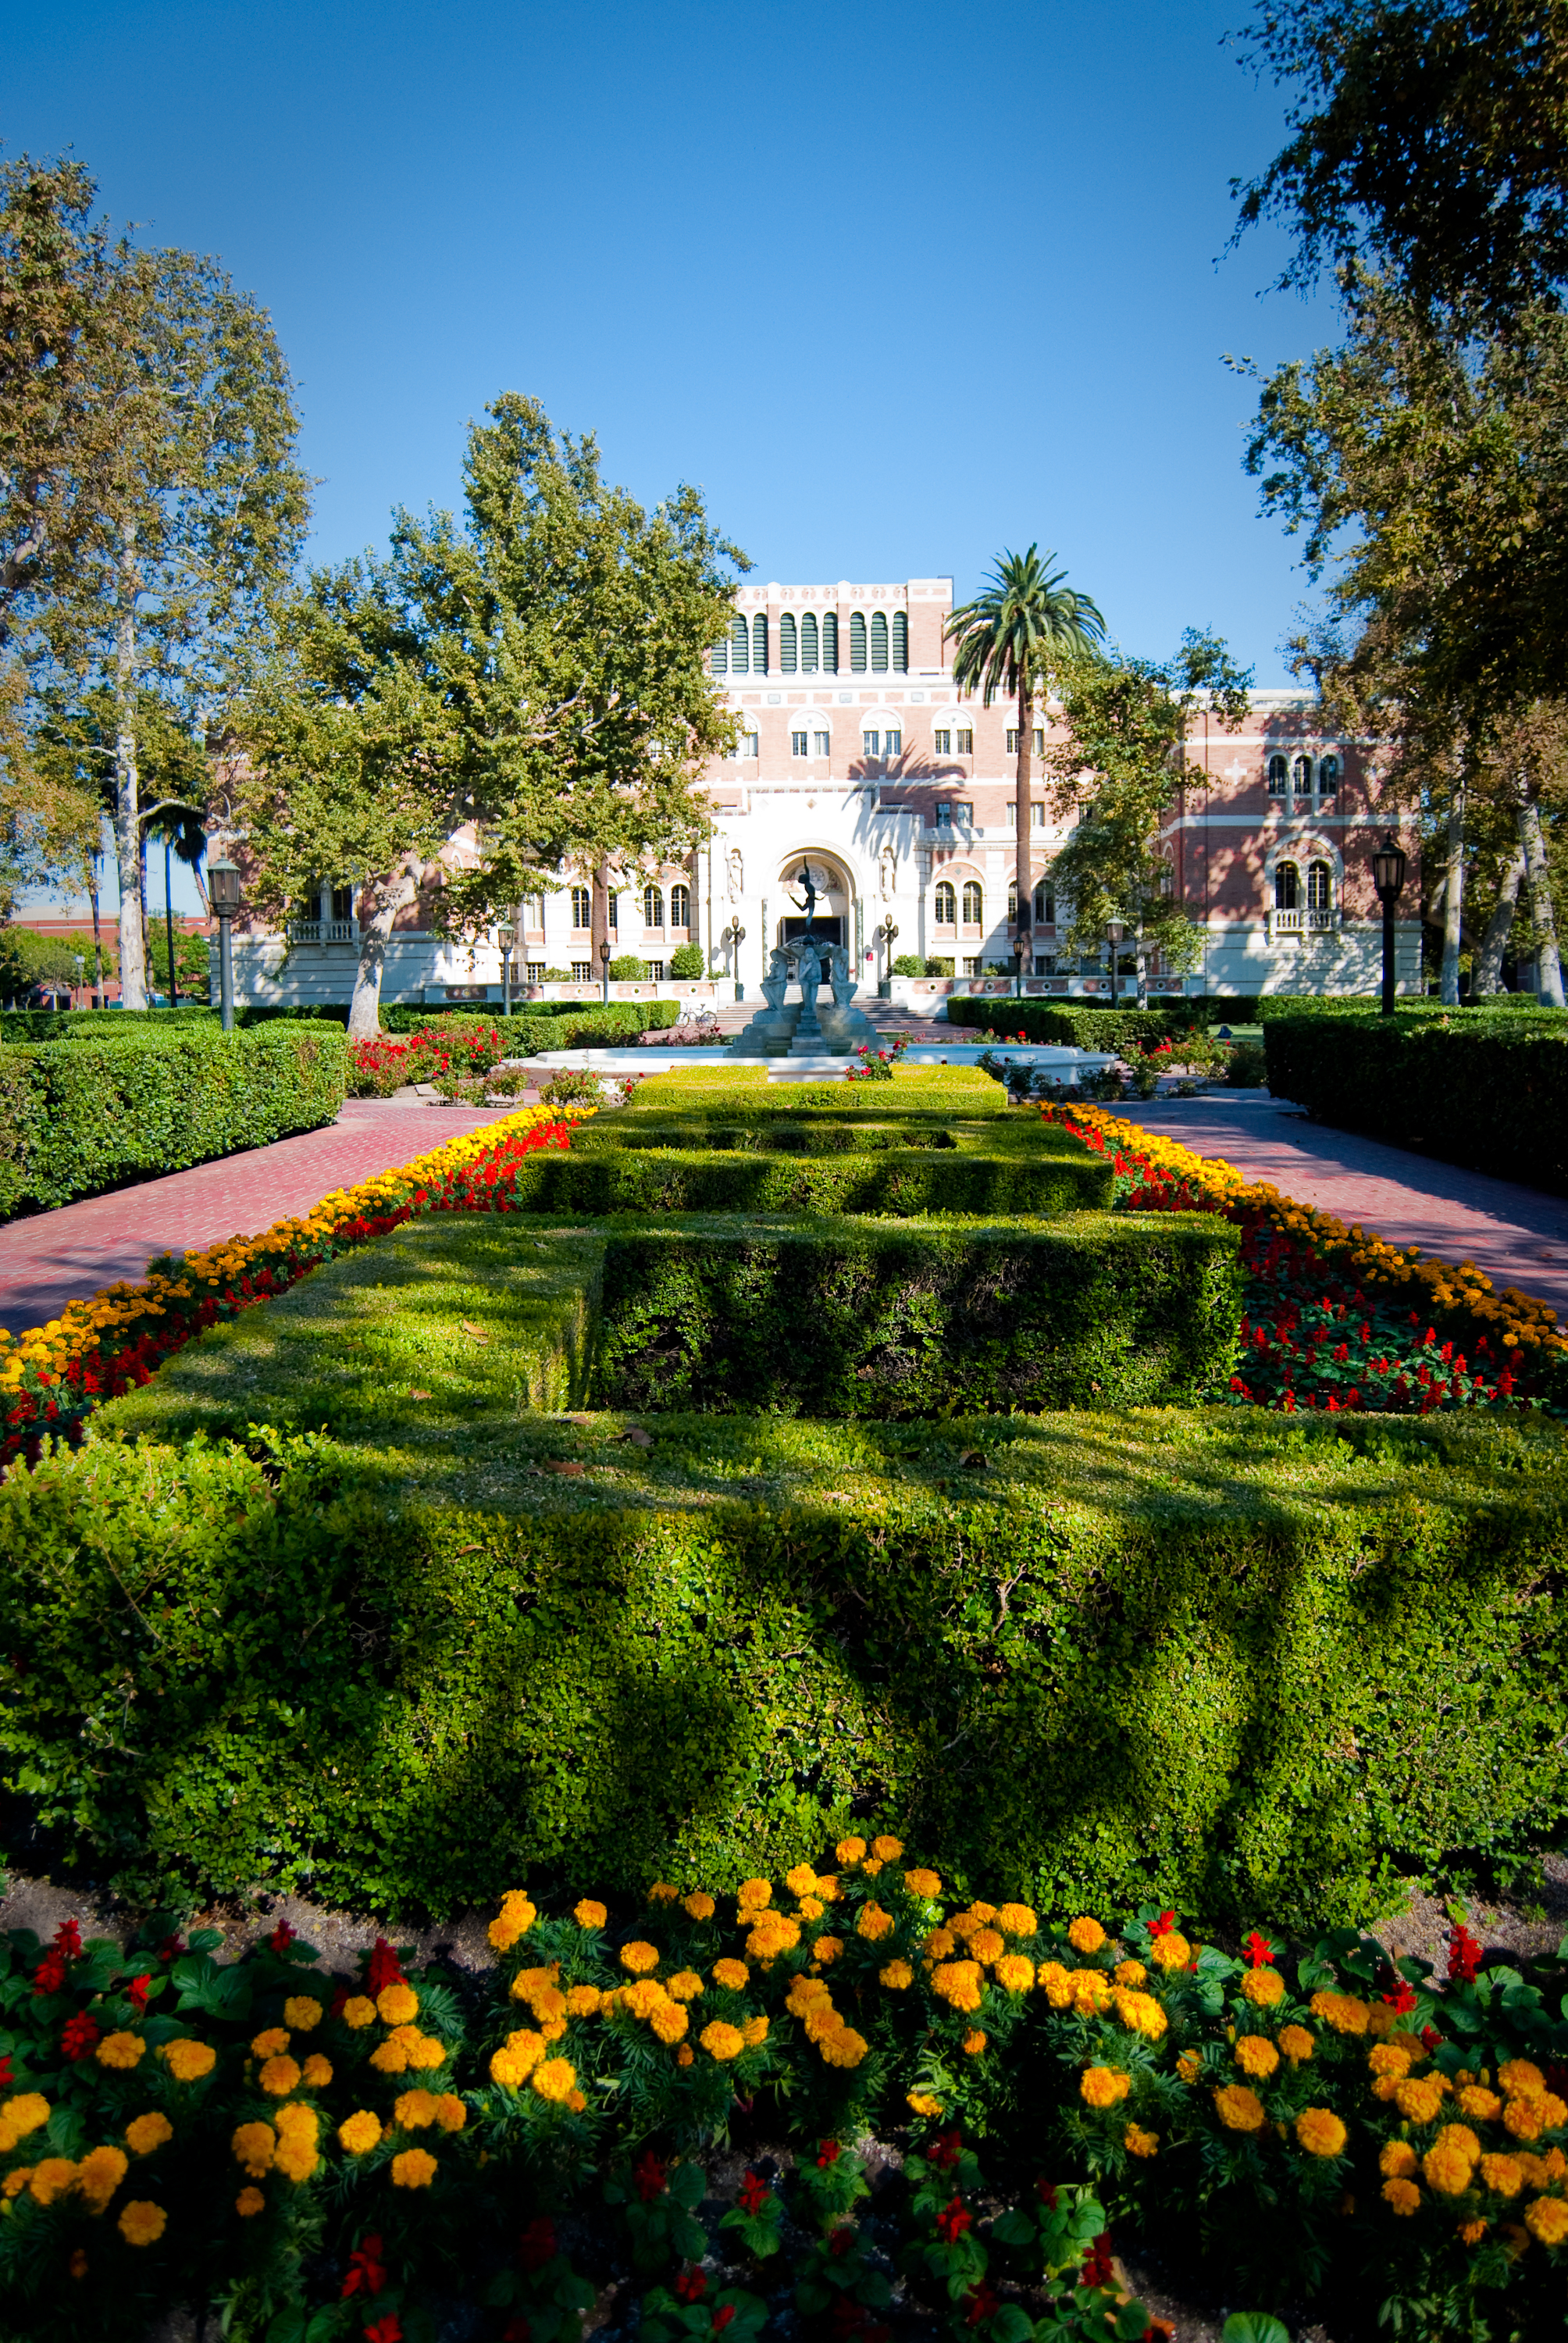 11-AUG-2013: Perfect summer Sunday at the University of Southern California.